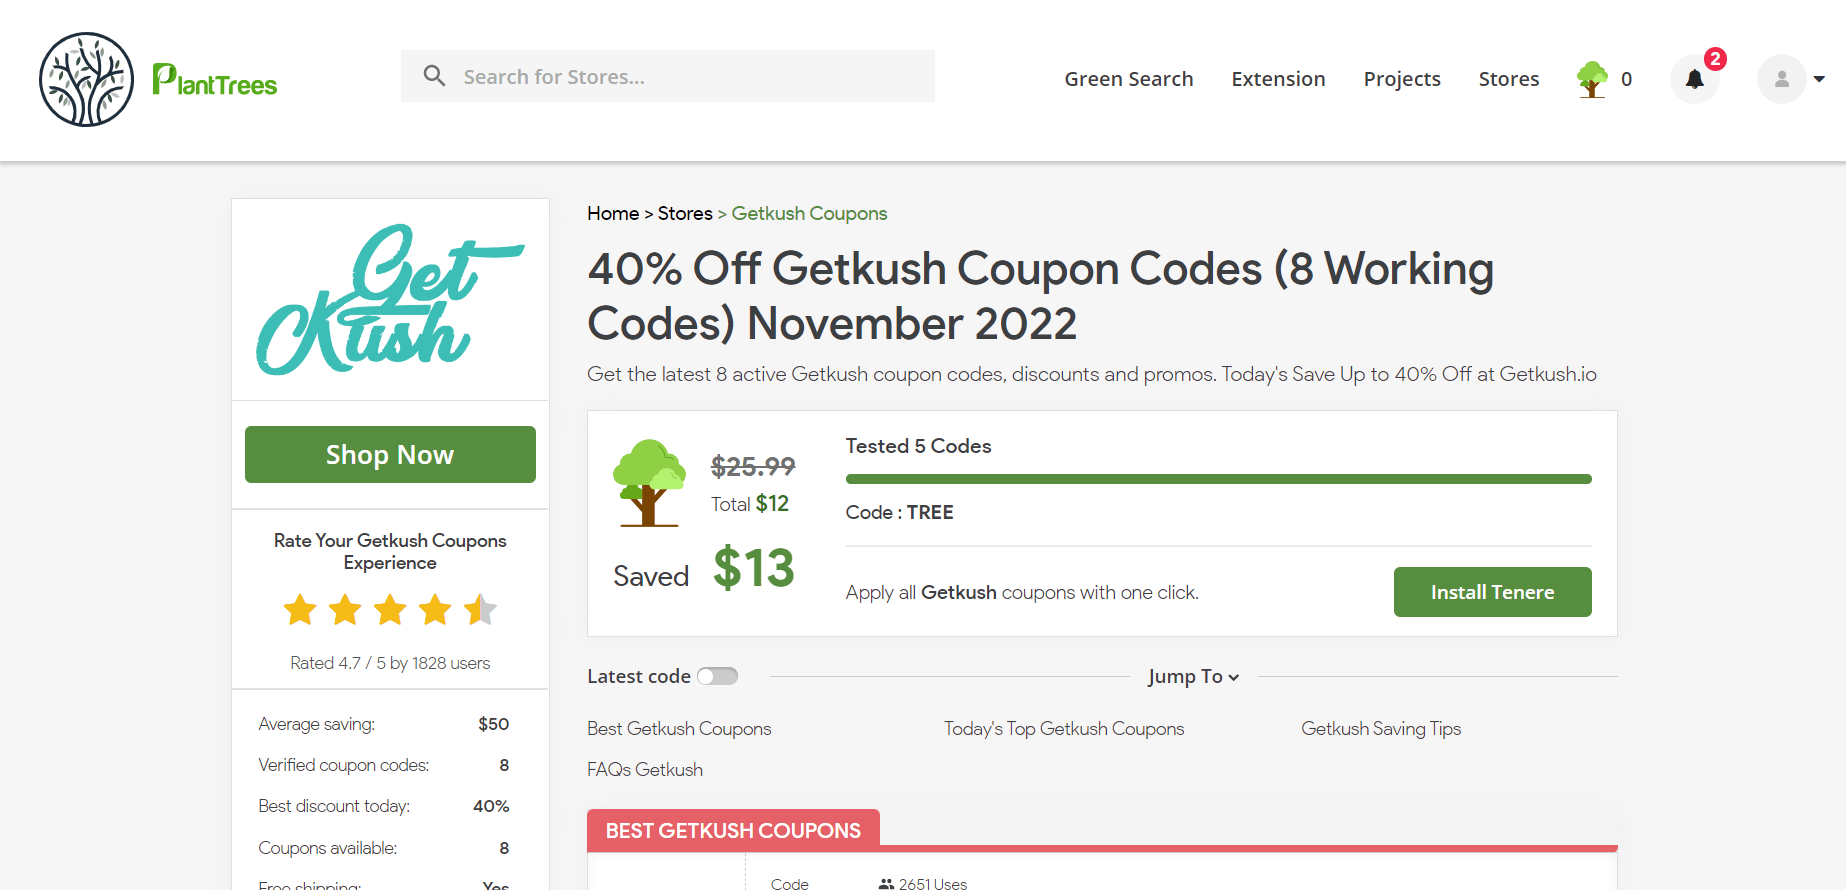 How To Use Getkush Coupon Code 2